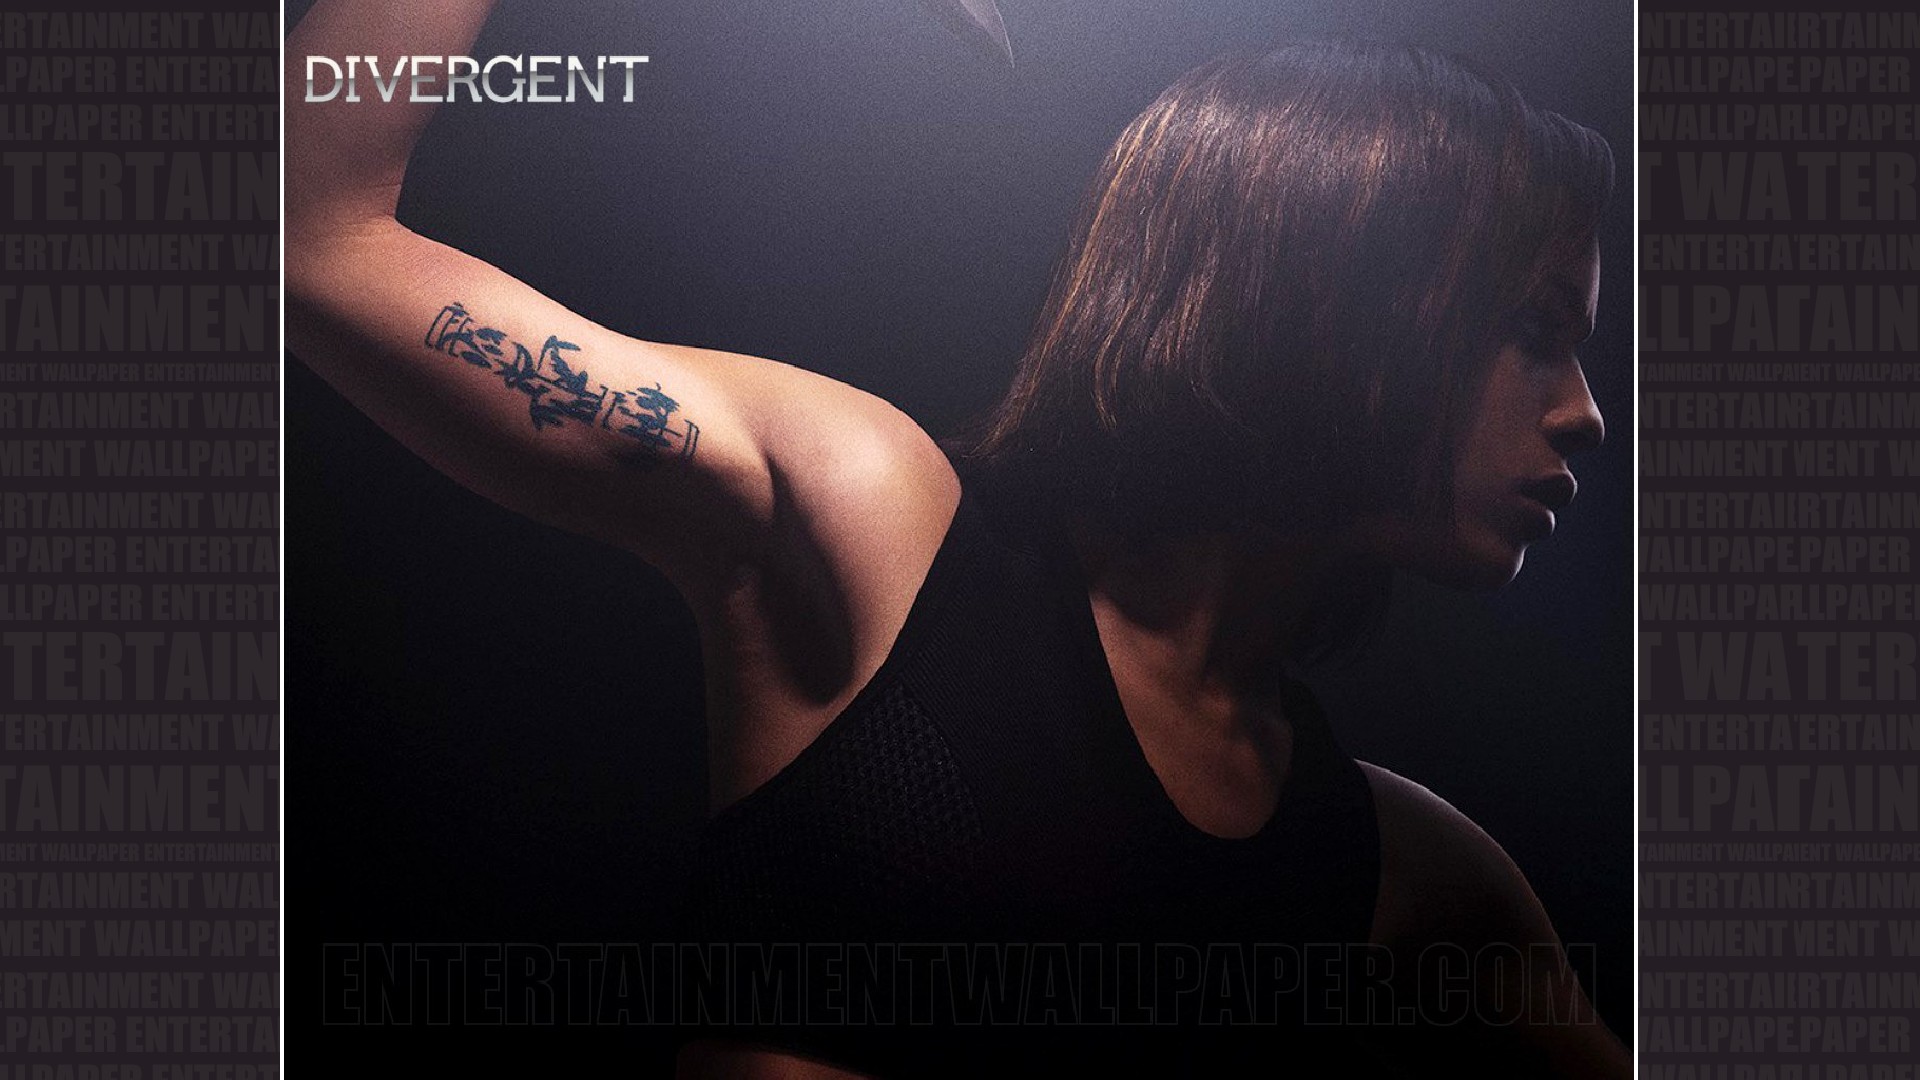 Wallpaper of Christina,Divergent for fans of Twivergents. 